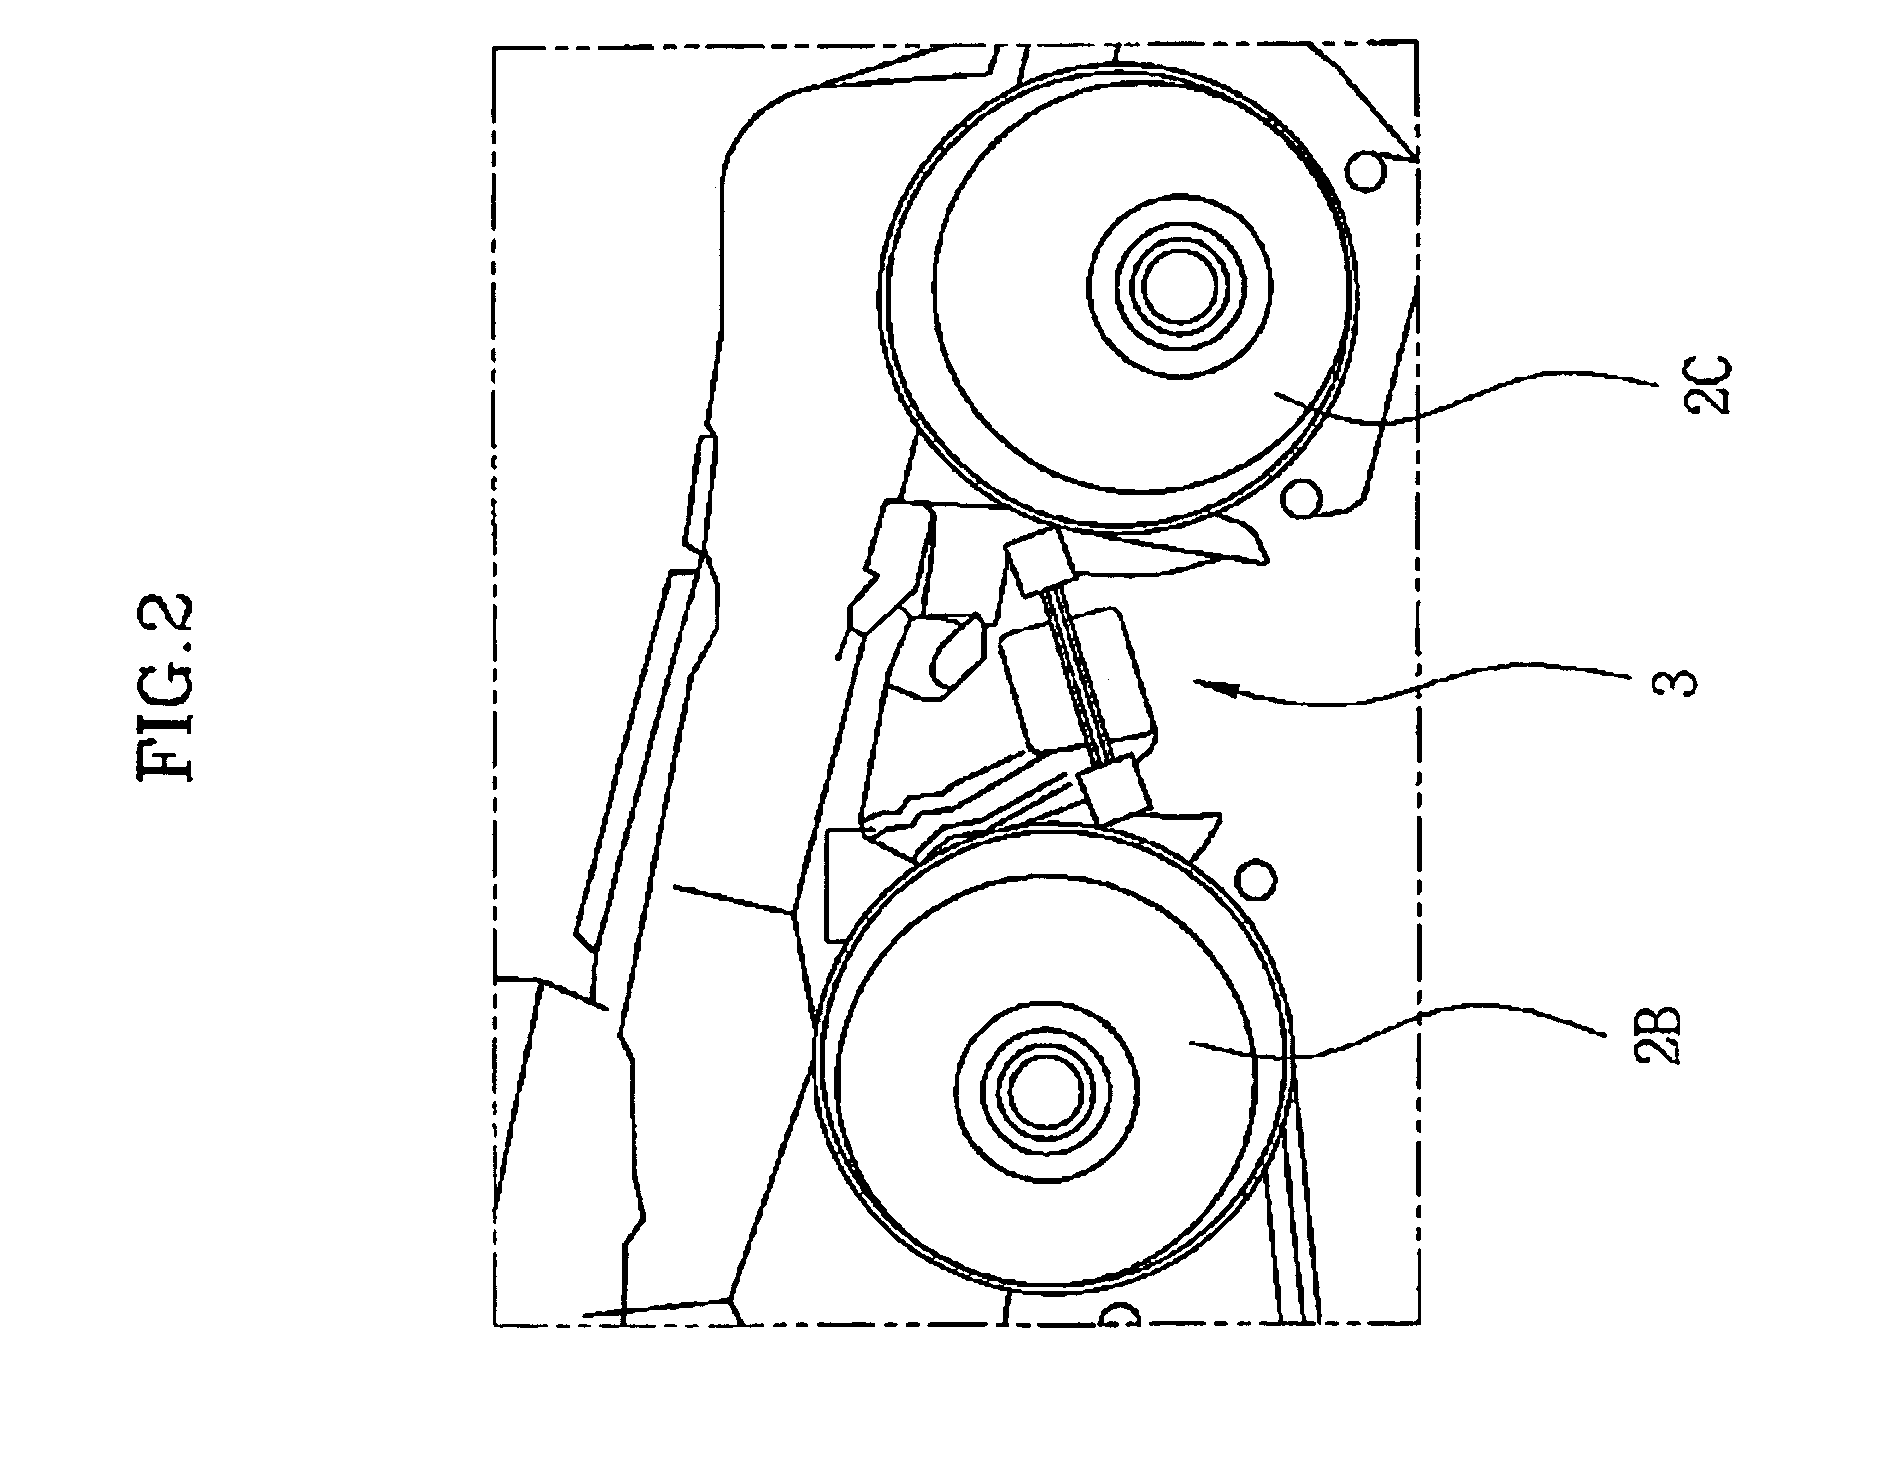 Rear impact shock absorbing structure for fuel cell vehicle